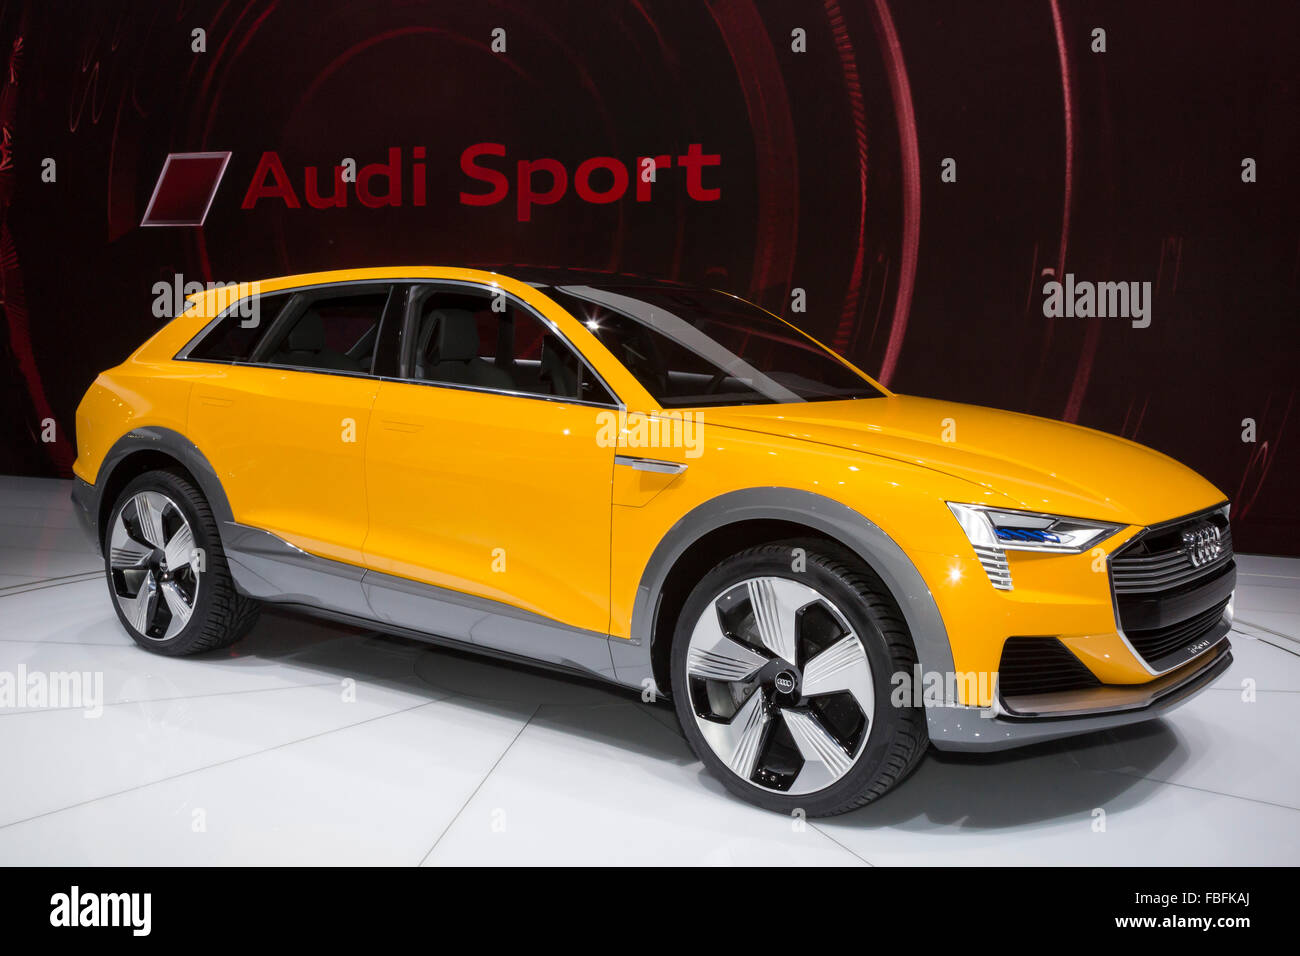 Detroit, Michigan - The Audi h-tron quattro hydrogen fuel cell concept car on display at the Detroit auto show. Stock Photo